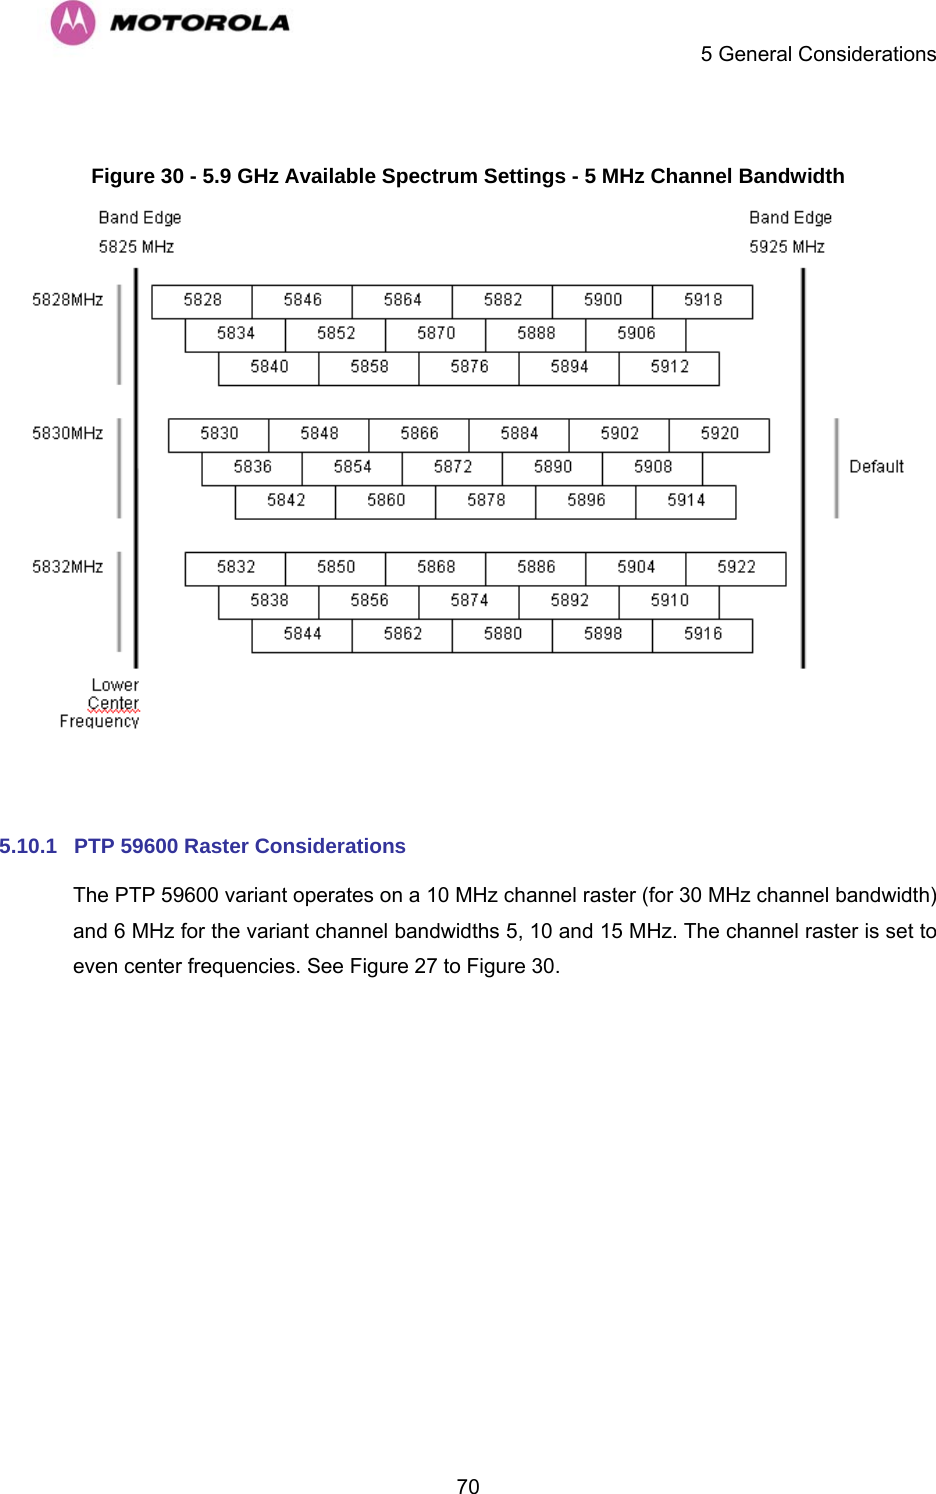    5 General Considerations  70 Figure 30 - 5.9 GHz Available Spectrum Settings - 5 MHz Channel Bandwidth   5.10.1  PTP 59600 Raster Considerations The PTP 59600 variant operates on a 10 MHz channel raster (for 30 MHz channel bandwidth) and 6 MHz for the variant channel bandwidths 5, 10 and 15 MHz. The channel raster is set to even center frequencies. See Figure 27 to Figure 30. 